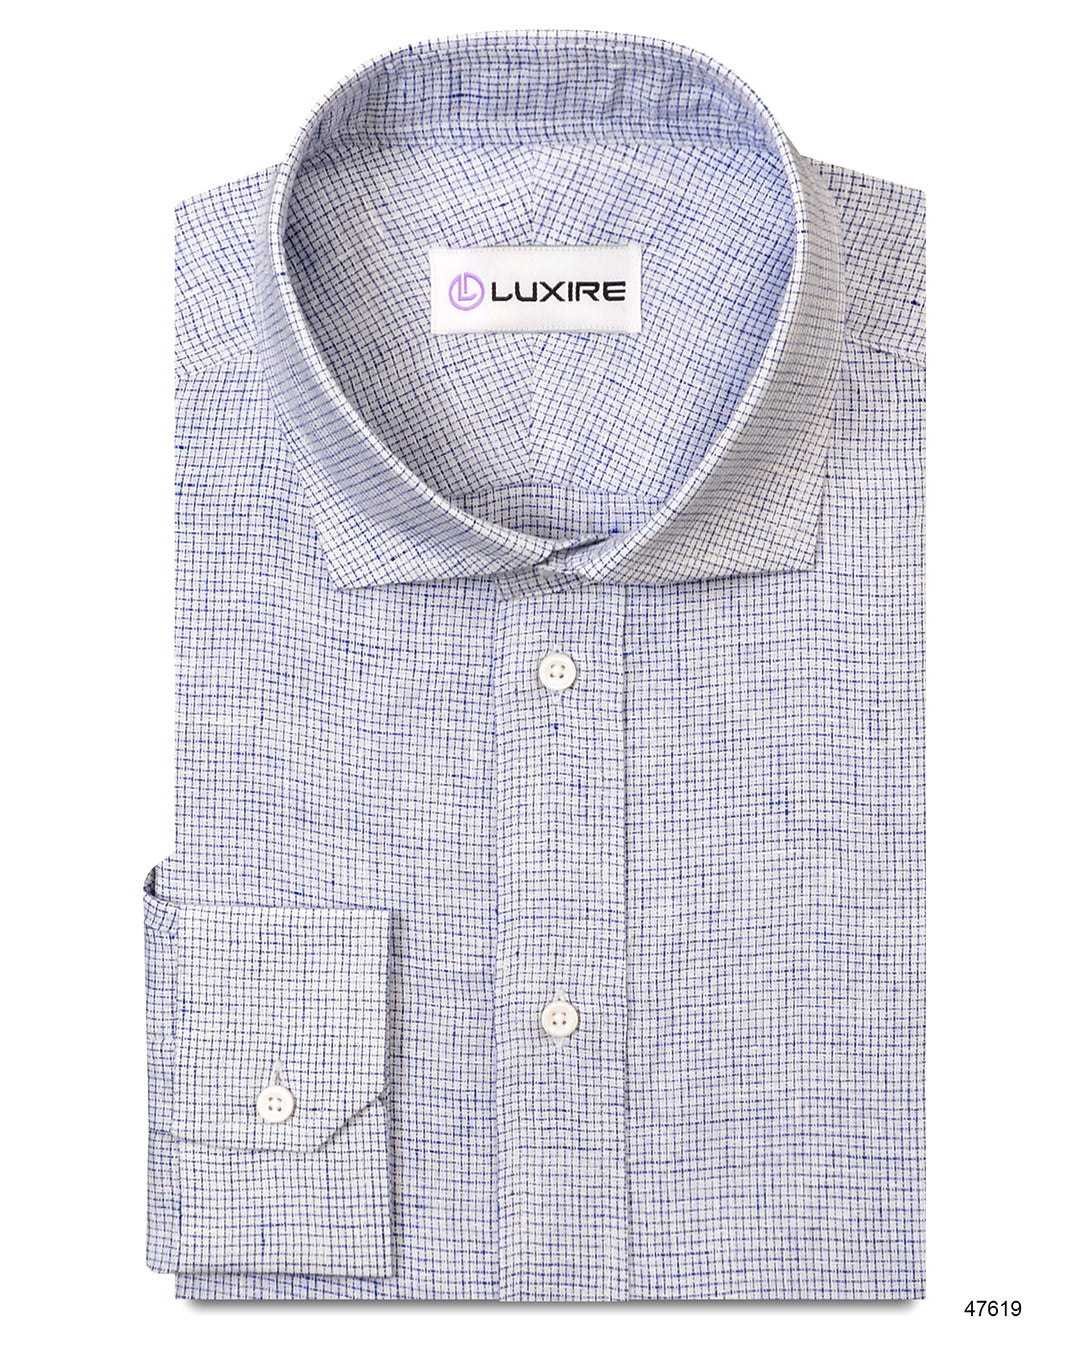 Front of the custom linen shirt for men in white with blue checks by Luxire Clothing